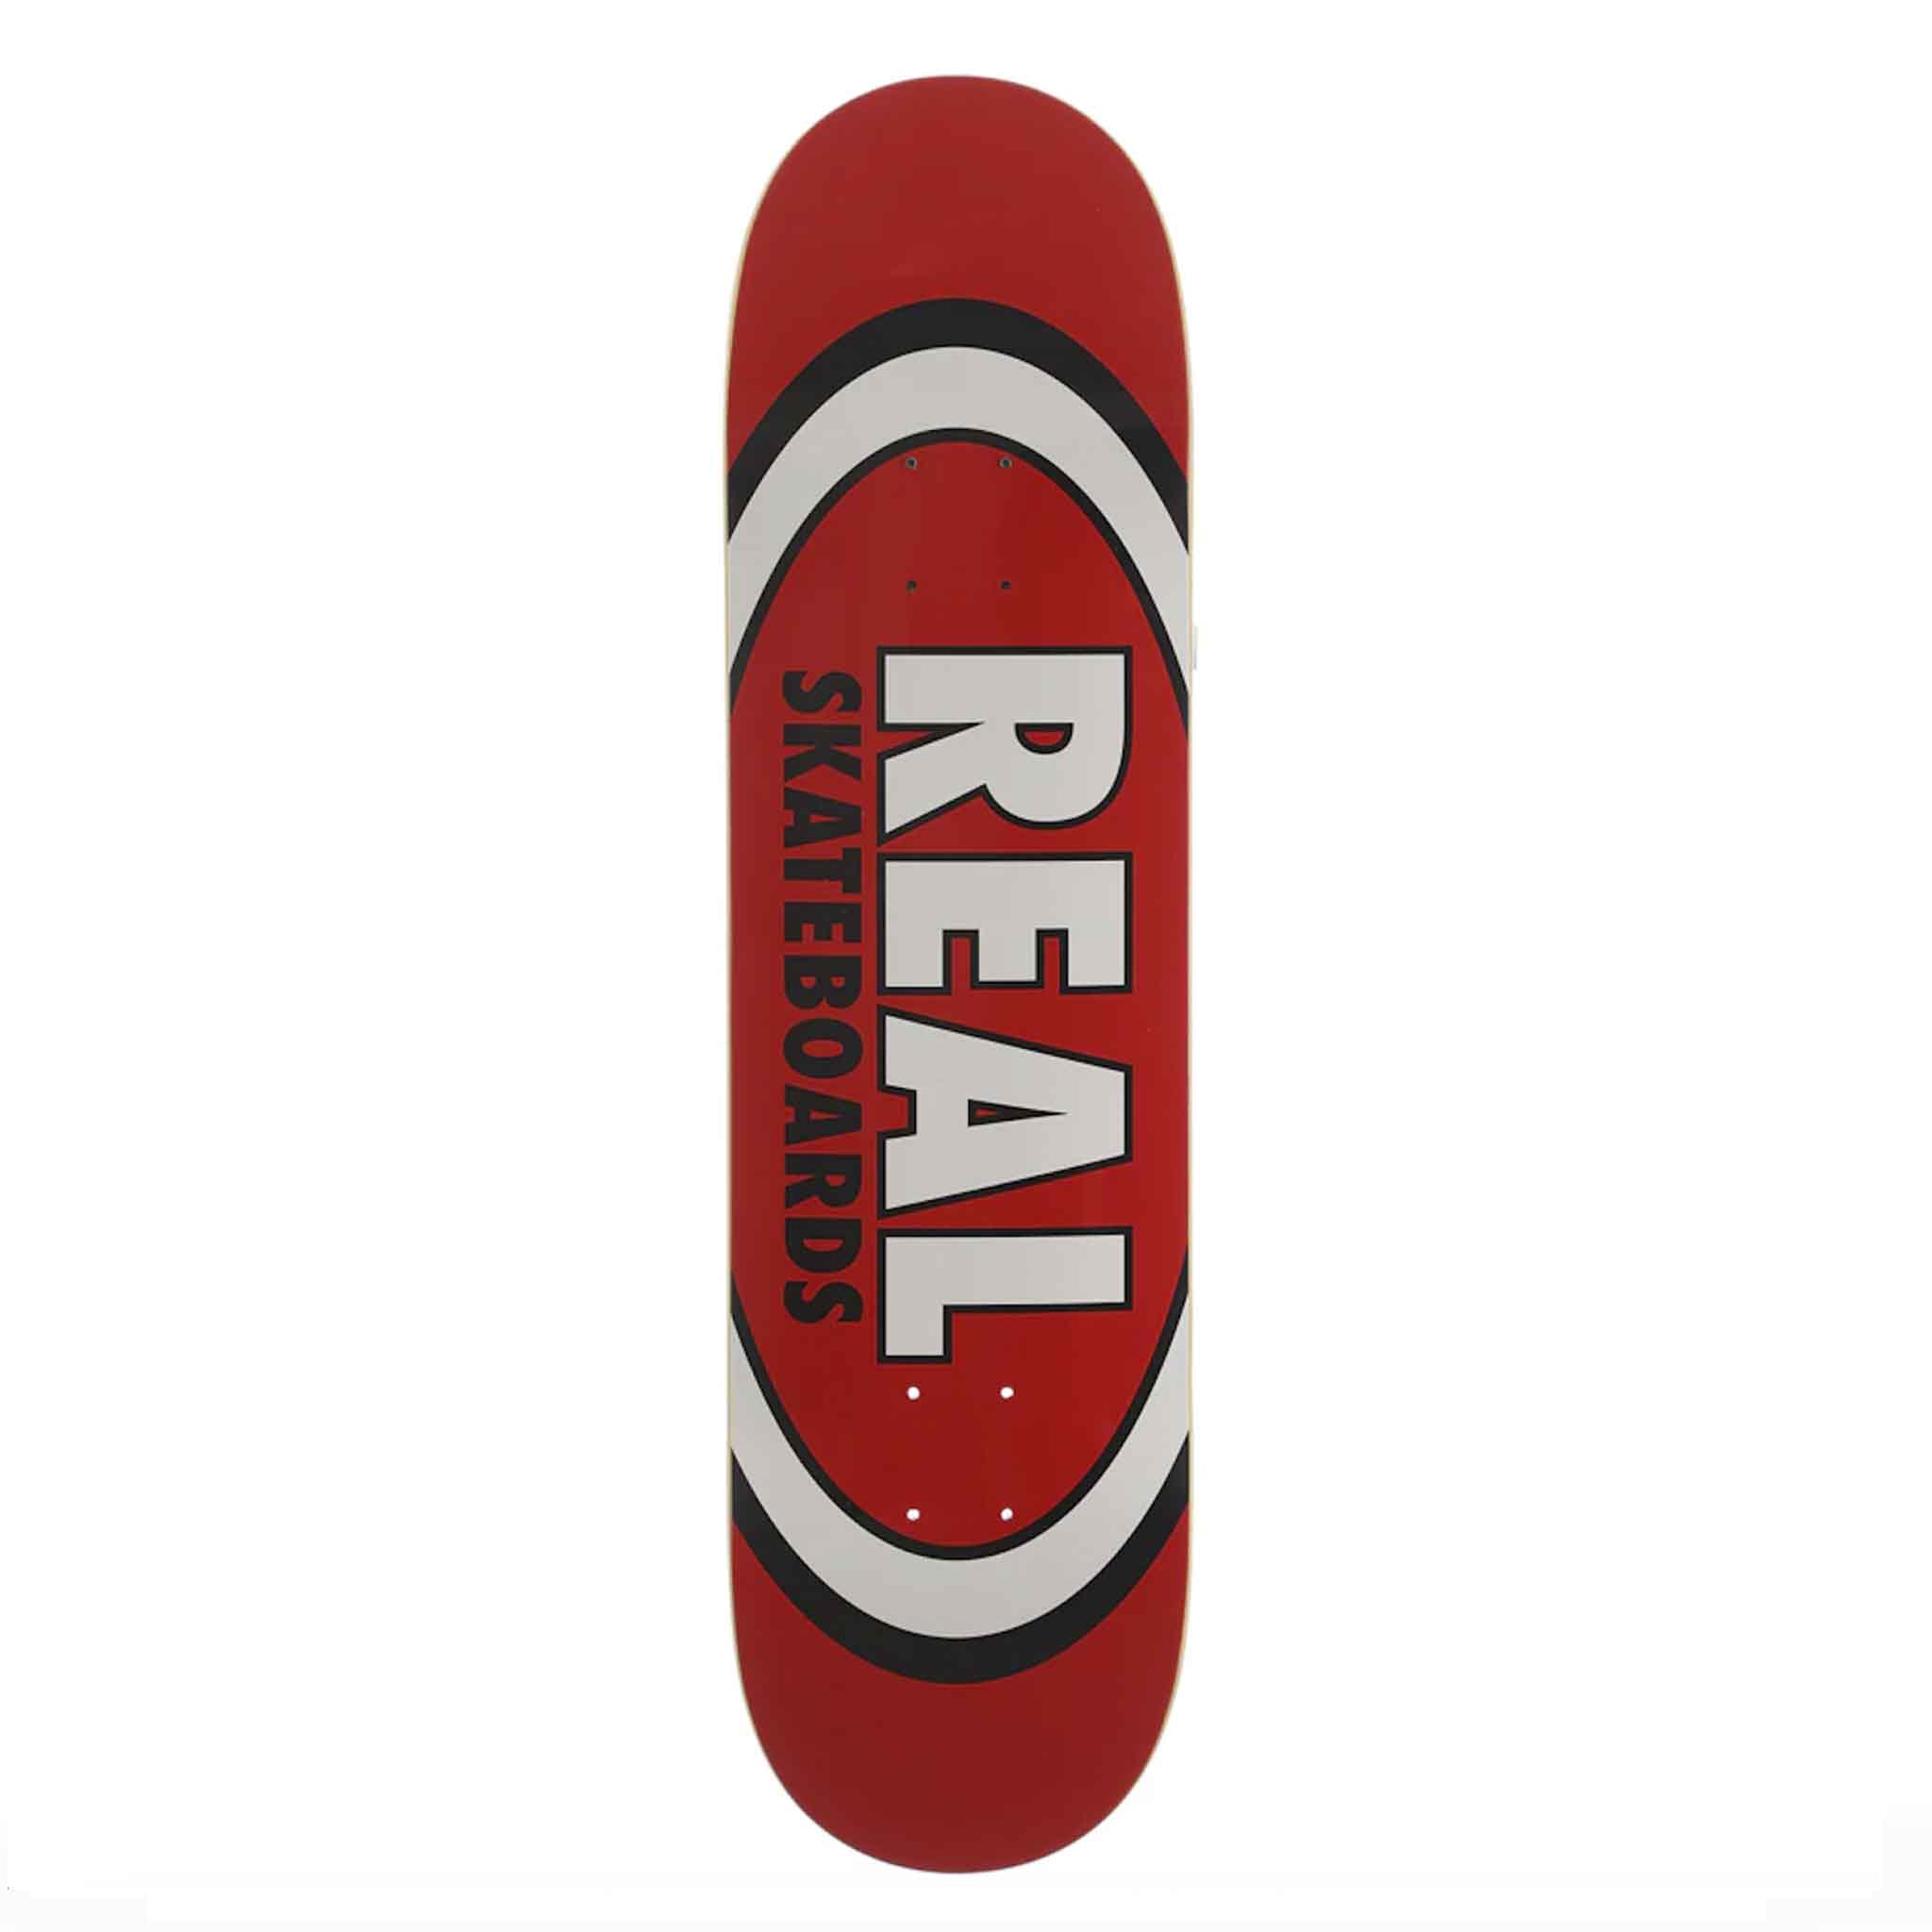 REAL - OVAL 8.12”